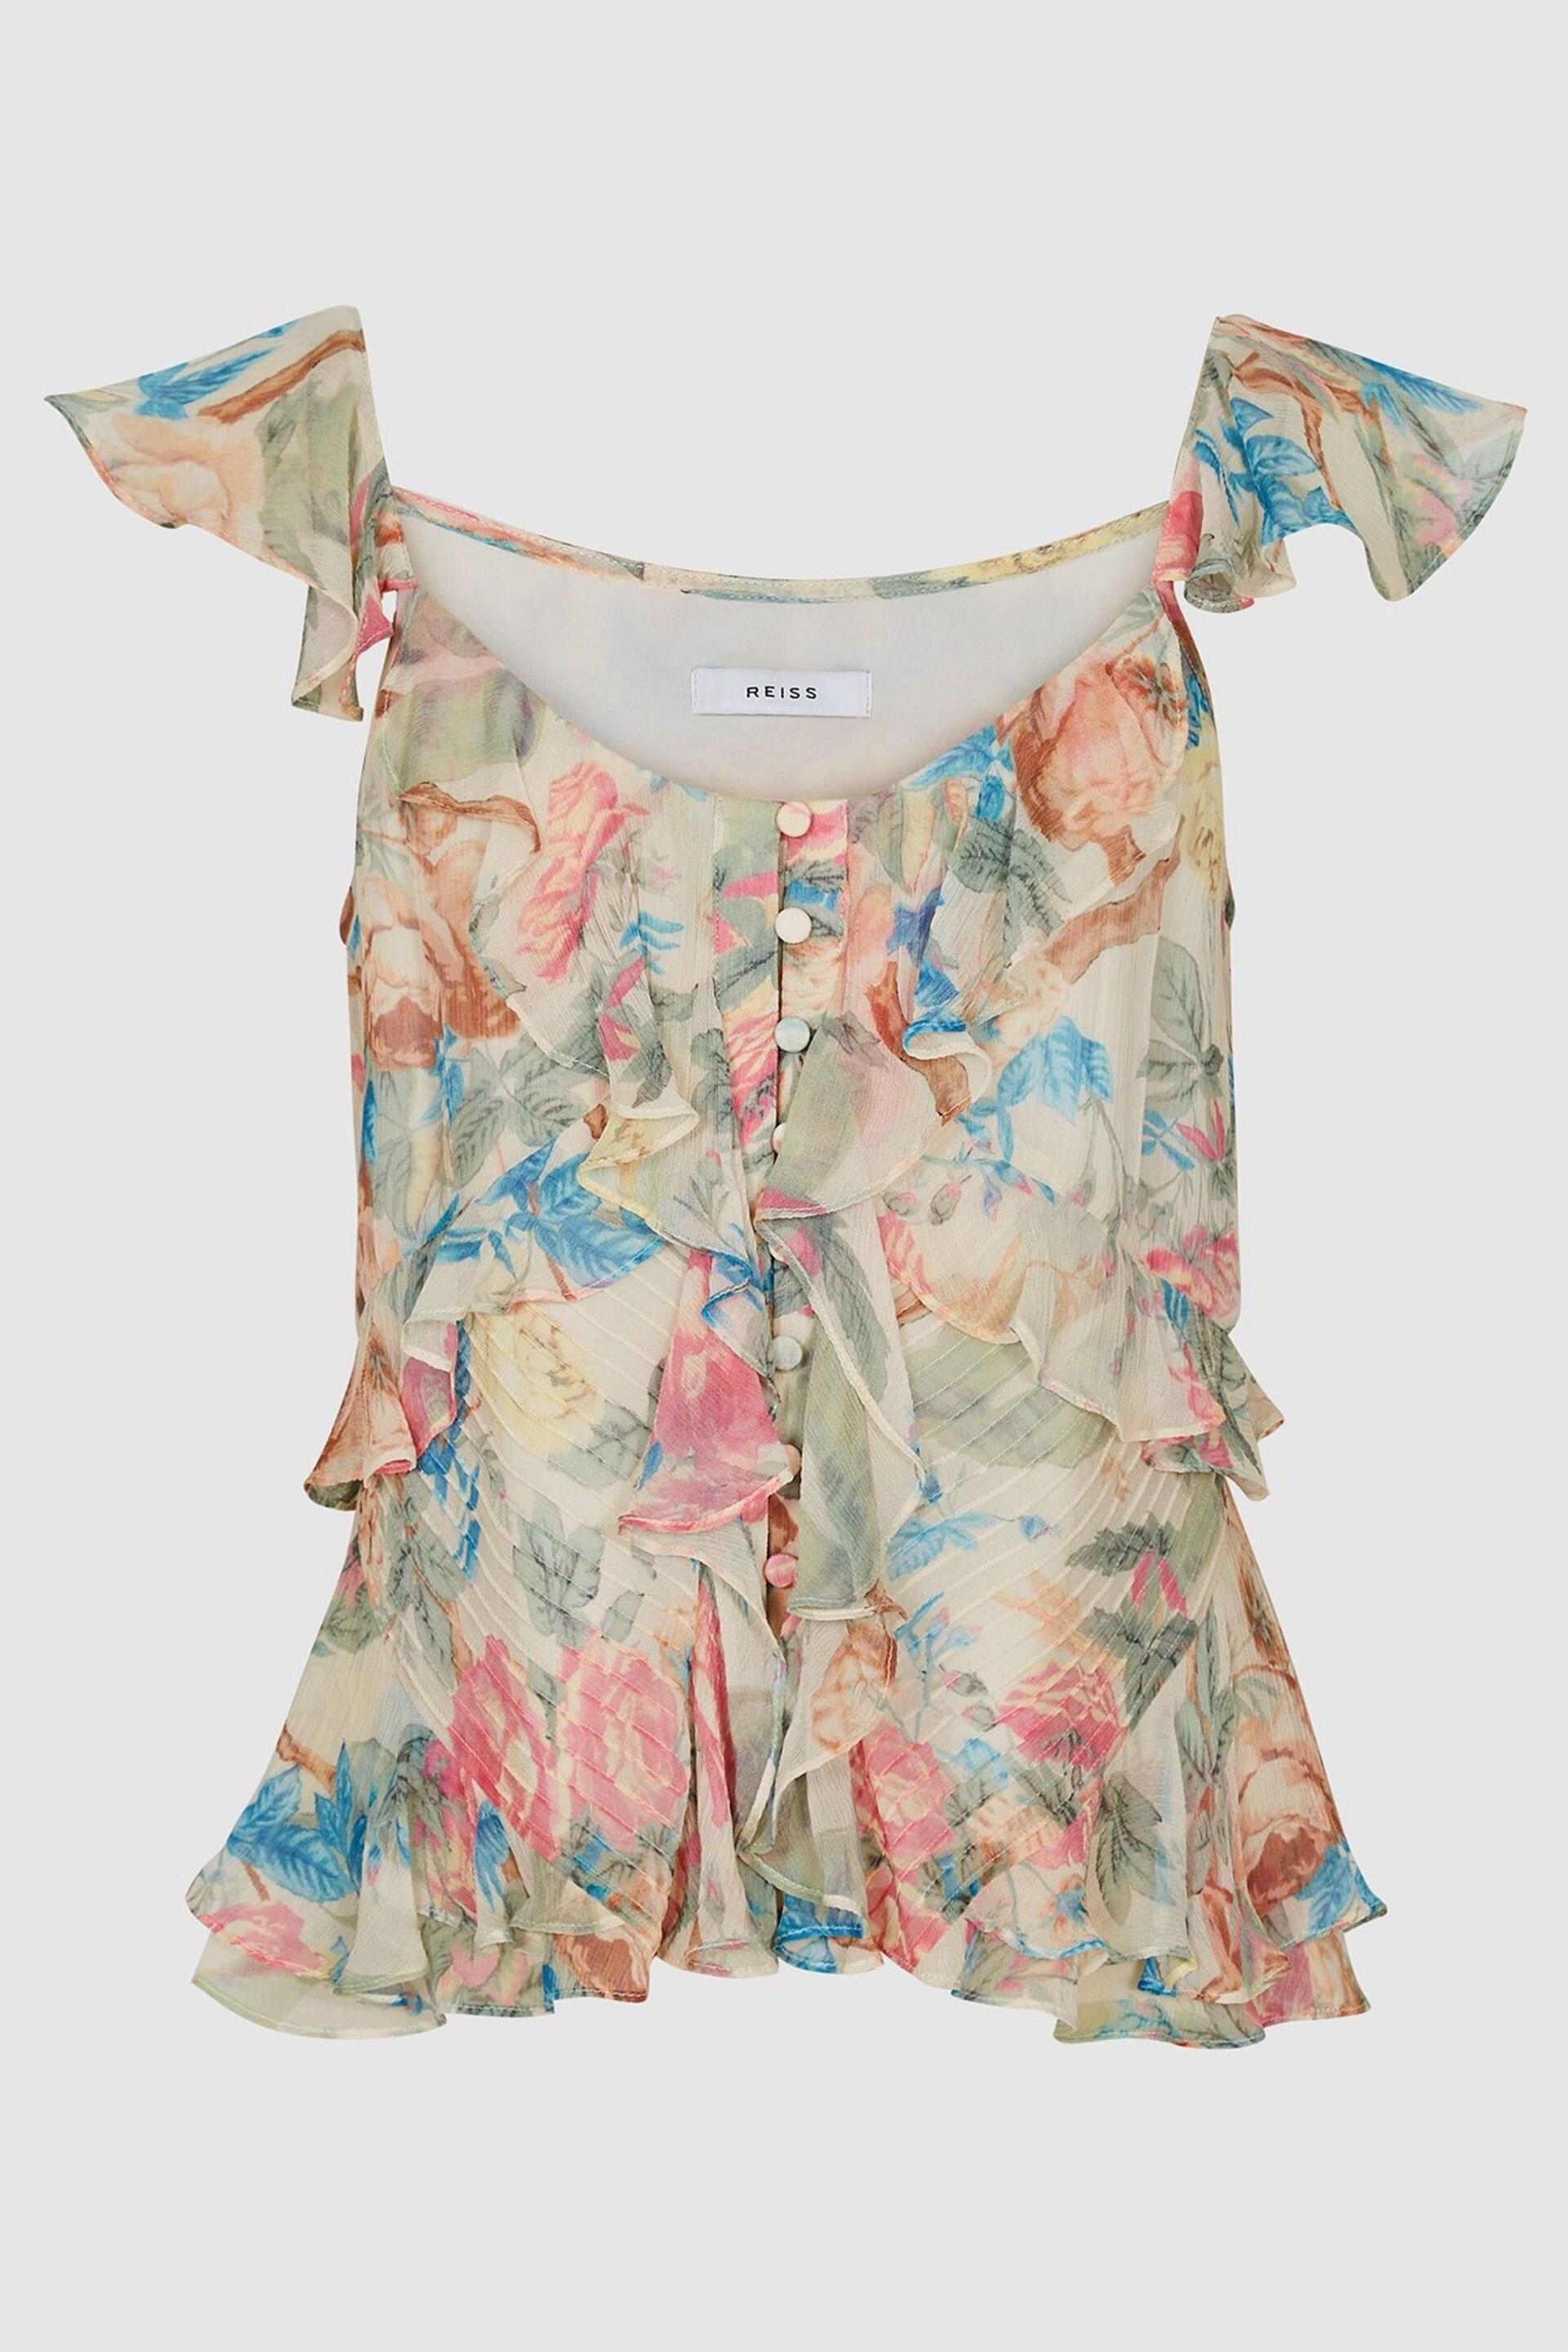 Reiss Lana Floral Cami Top - Image 2 of 5